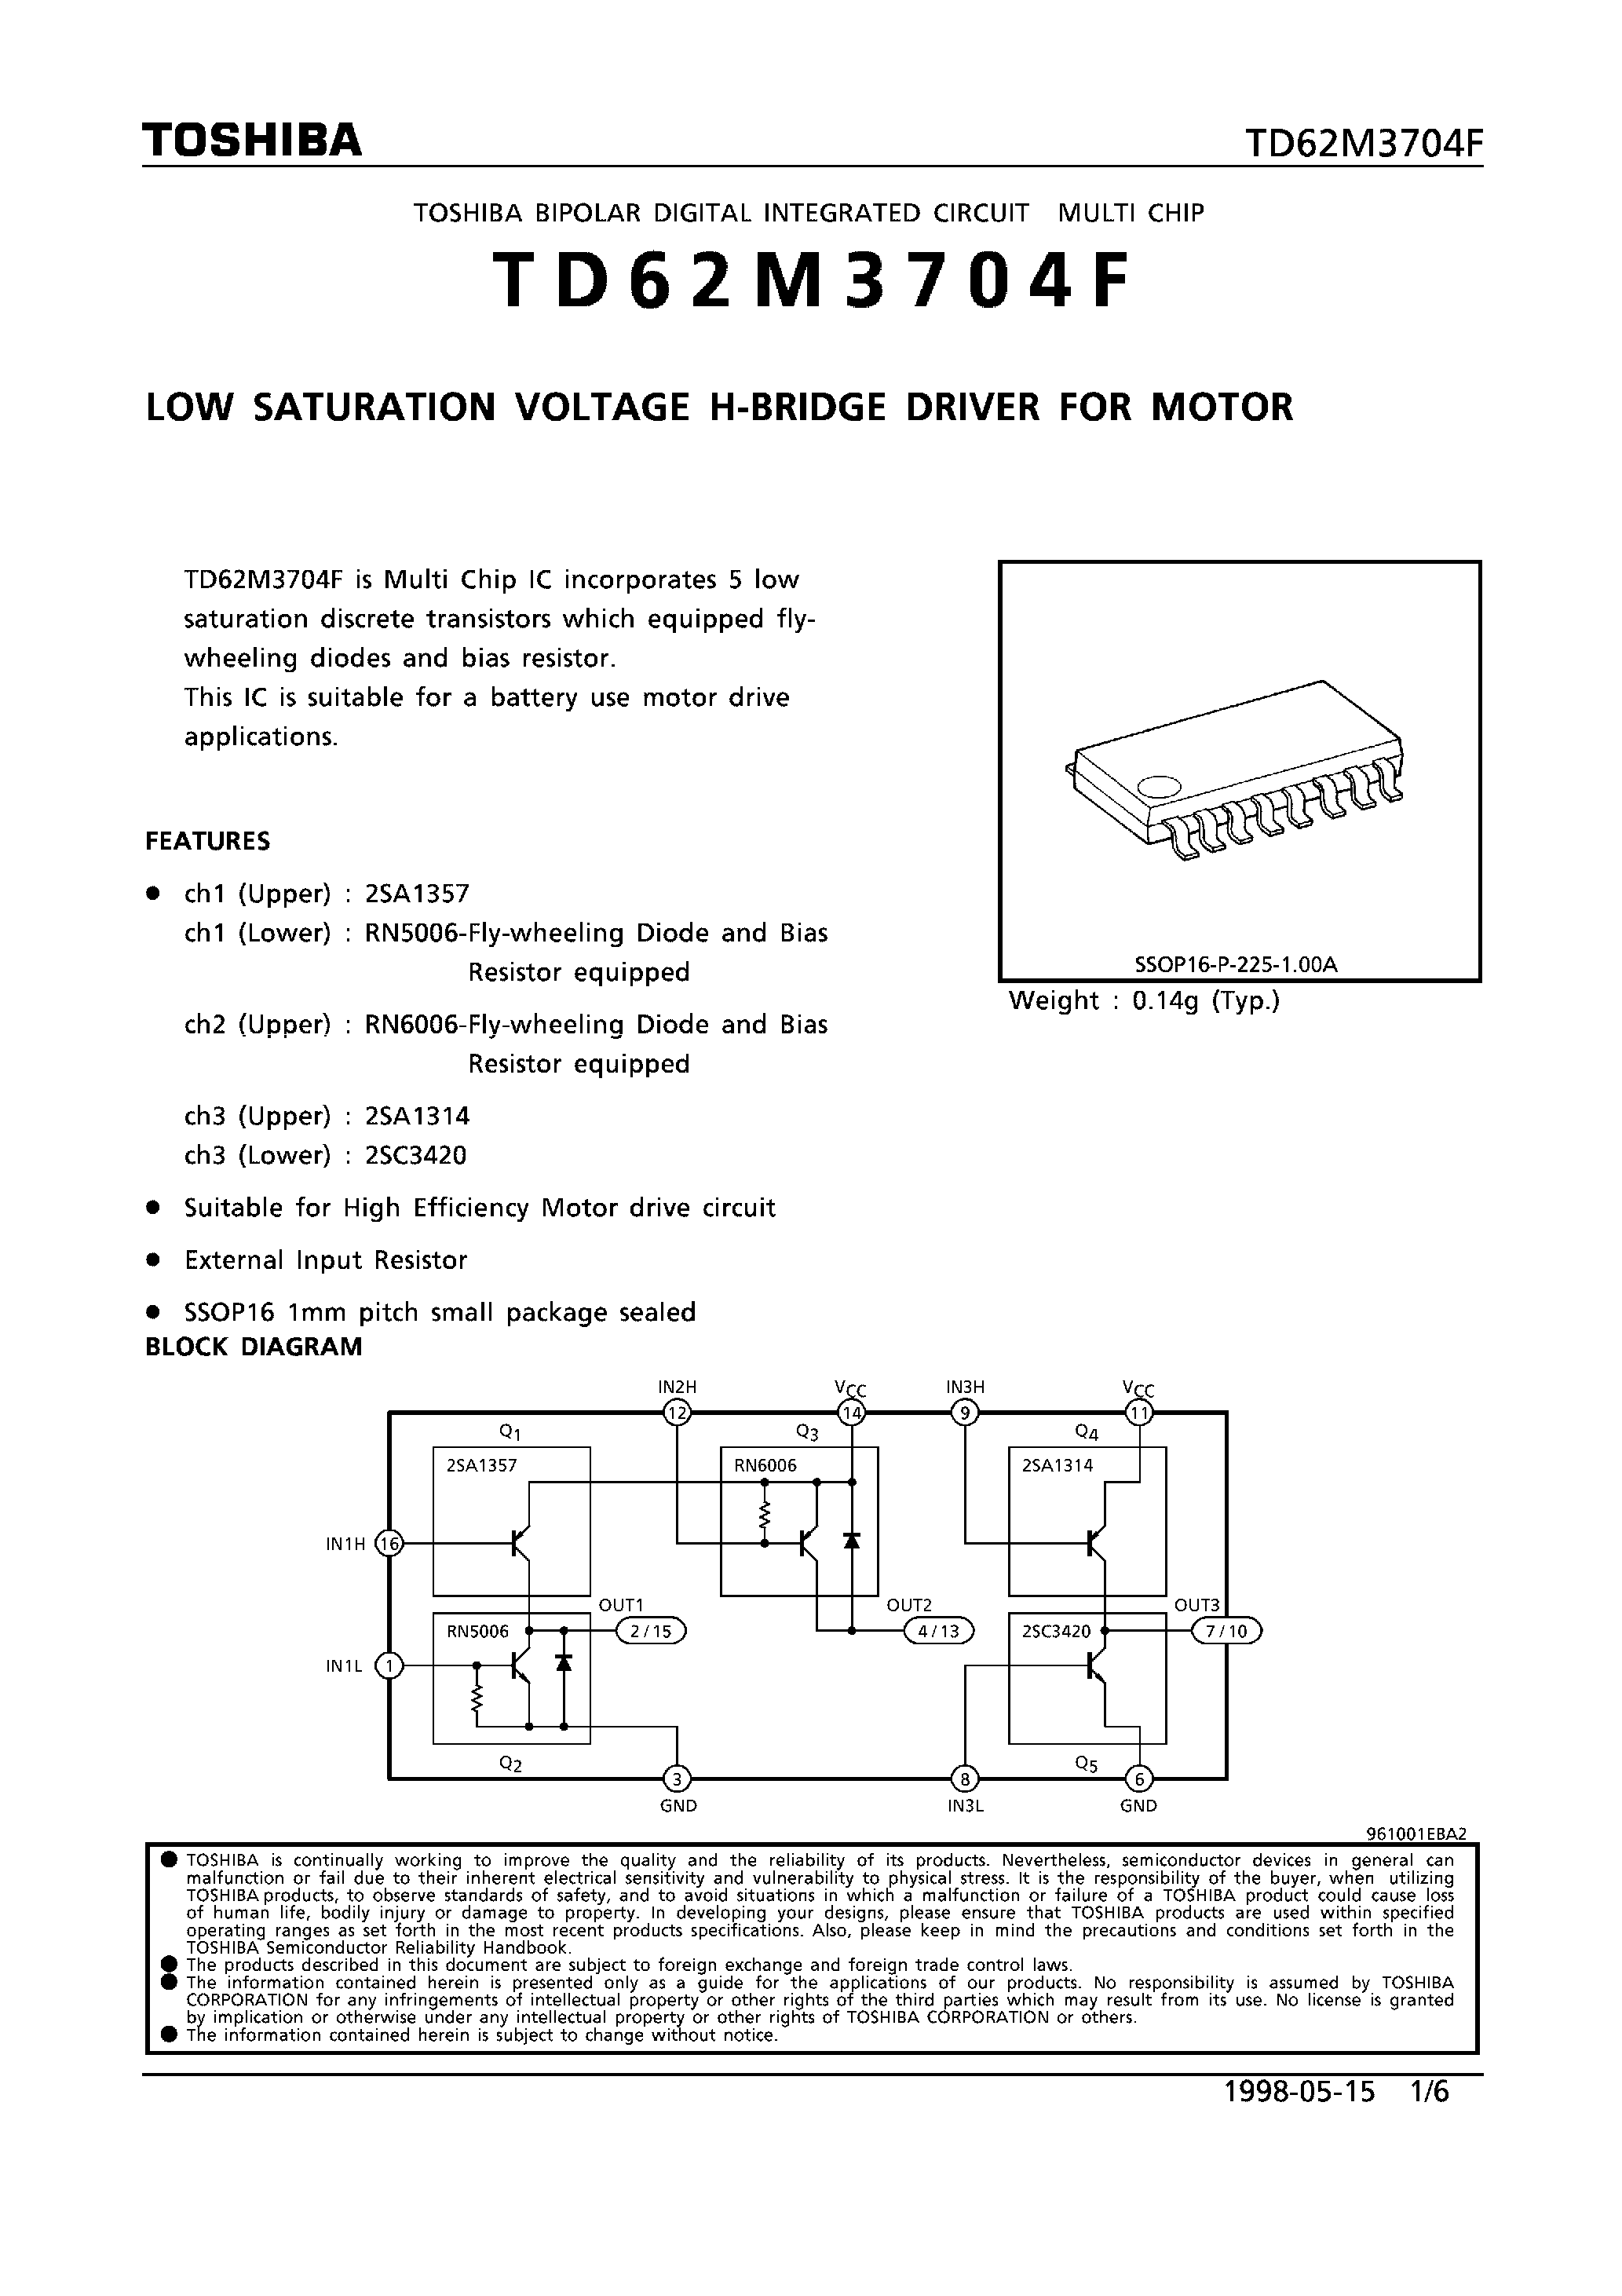 Datasheet TD62M3704F - LOW SATURATION VOLTAGE H-BRIDGE DRIVER FOR MOTOR page 1